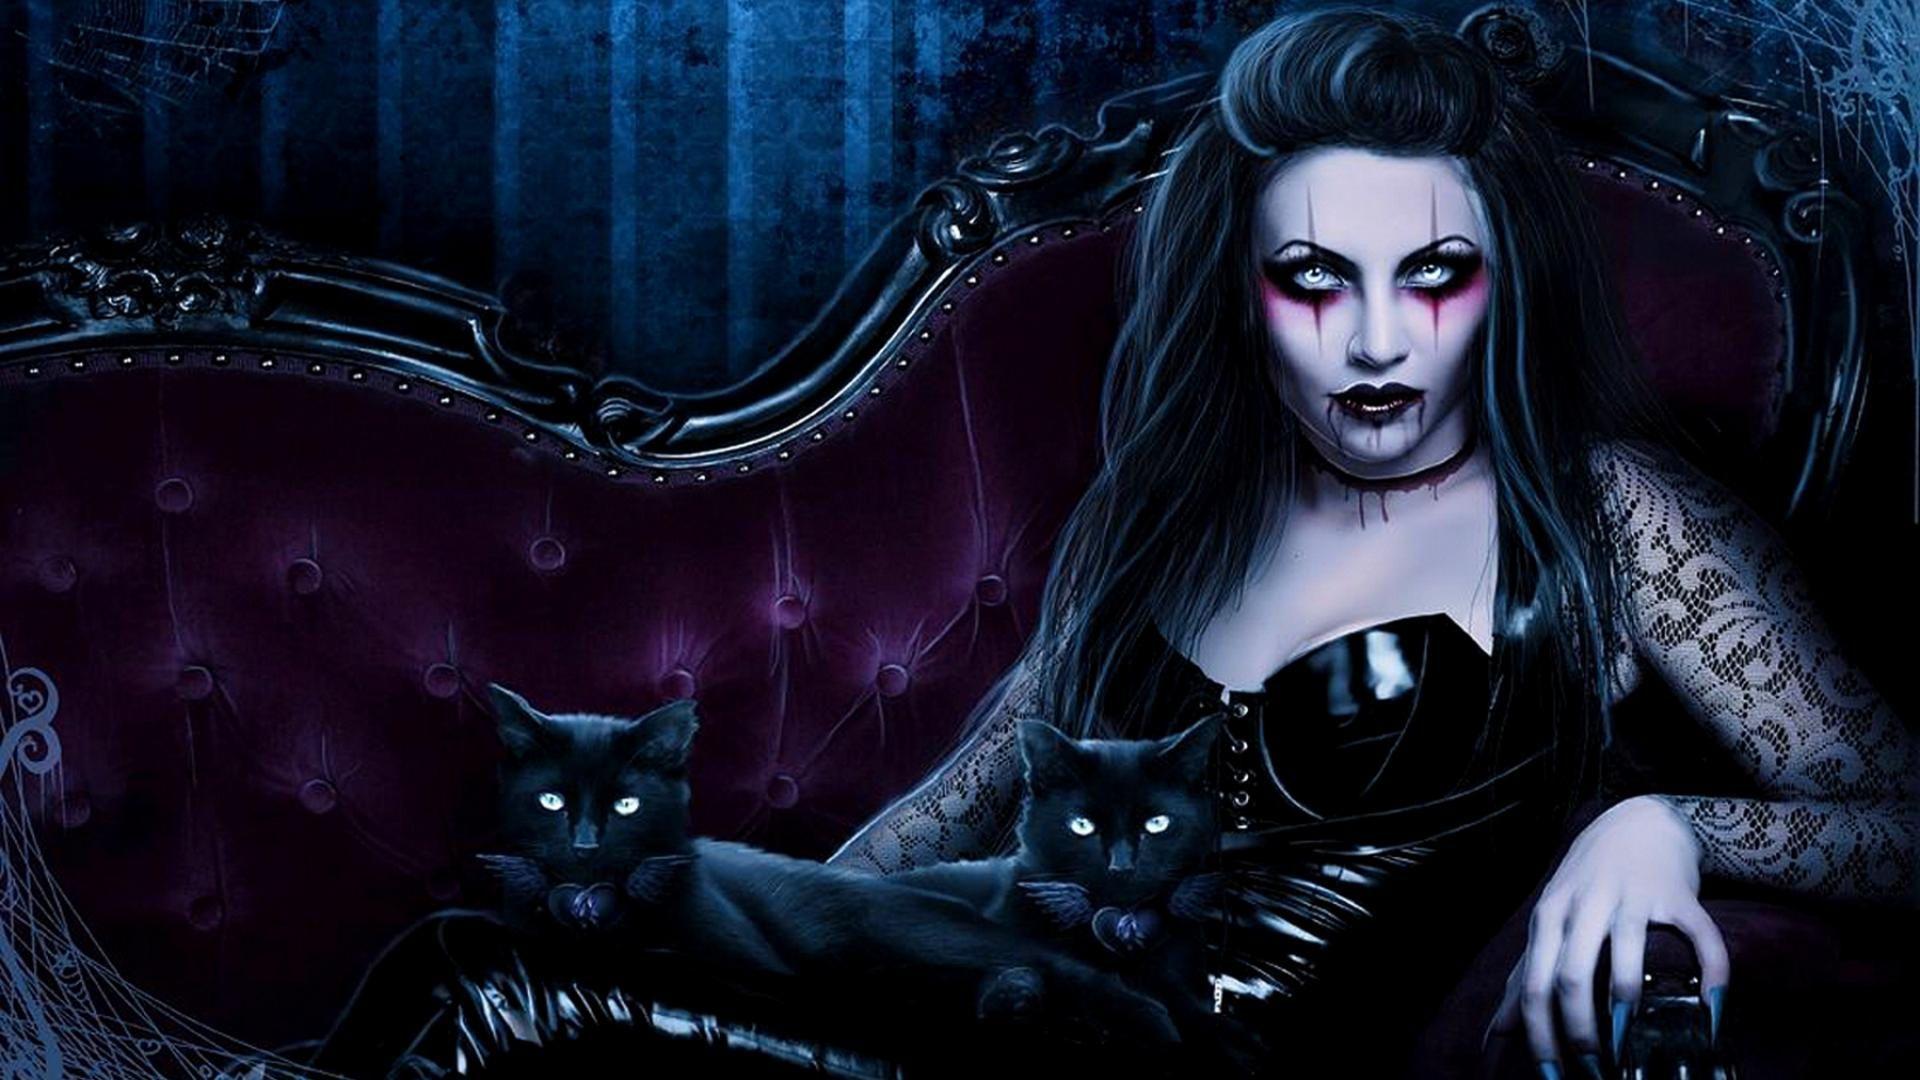 Cute Goth Wallpapers